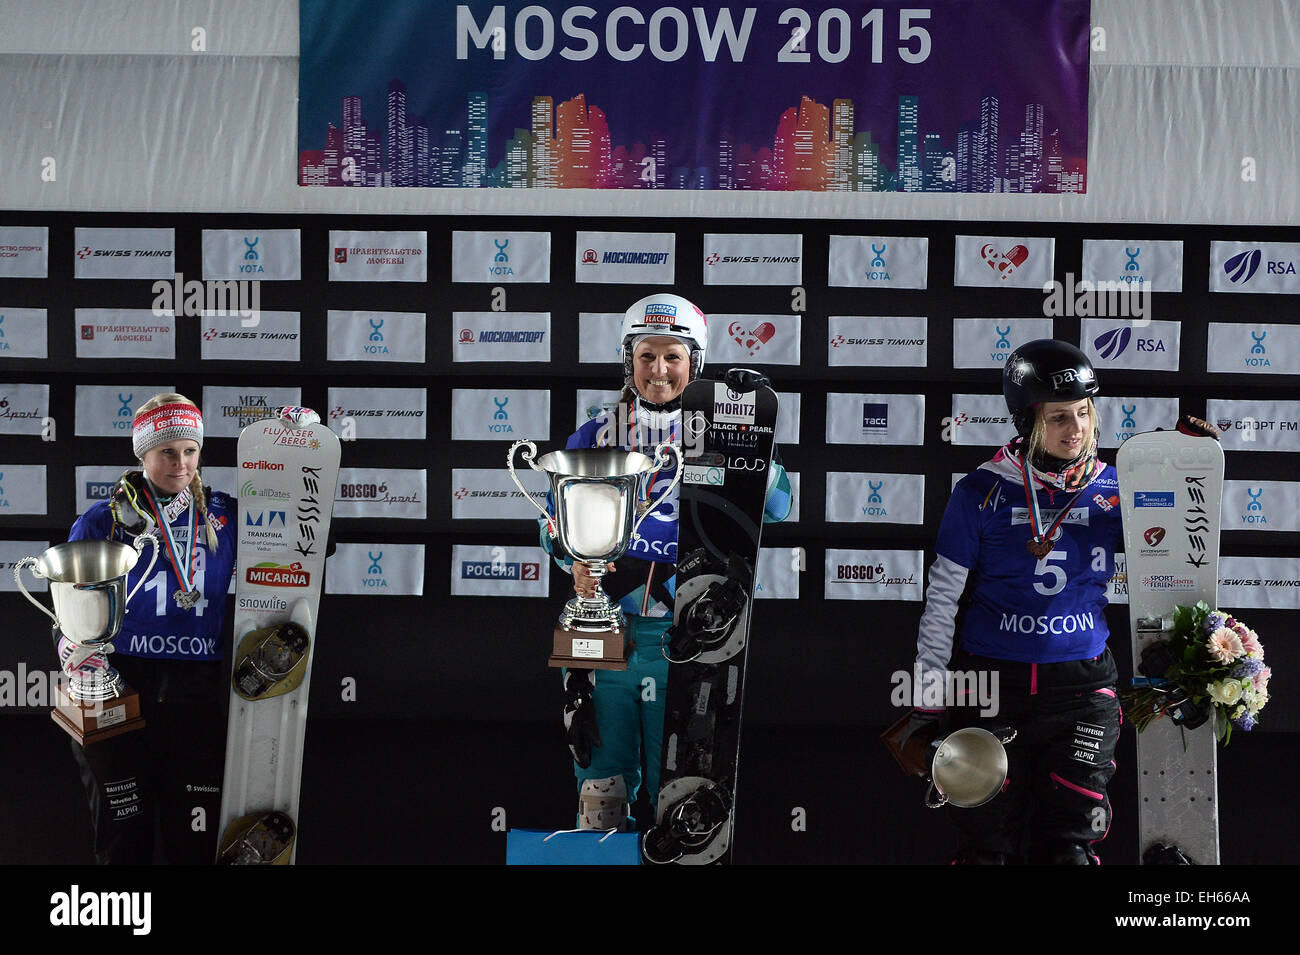 Moscow, Russia. 7th Mar, 2015. Silver medalist Julie Zogg of Switzerland (L), gold medalist Claudia Riegler of Austria (C) and Bronze medalist Patrizia Kummer of Switzerland pose during the awarding ceremony after the ladies parallel slalom of FIS Snowboard World Cup in Moscow, capital of Russia, March 7, 2015. © Pavel Bednyakov/Xinhua/Alamy Live News Stock Photo